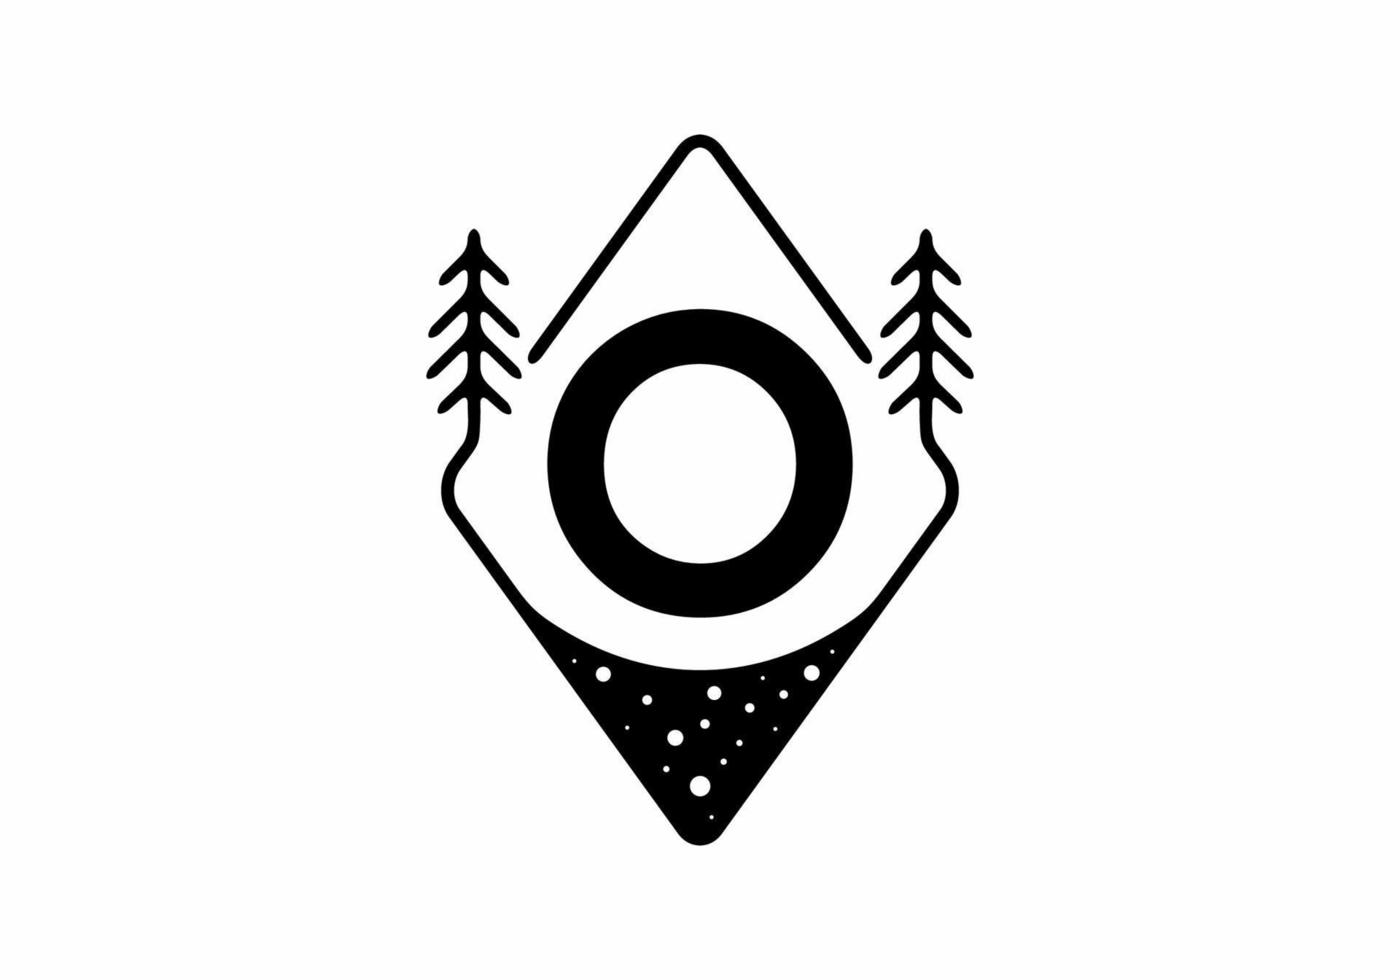 Black line art badge with pine trees and O letter vector